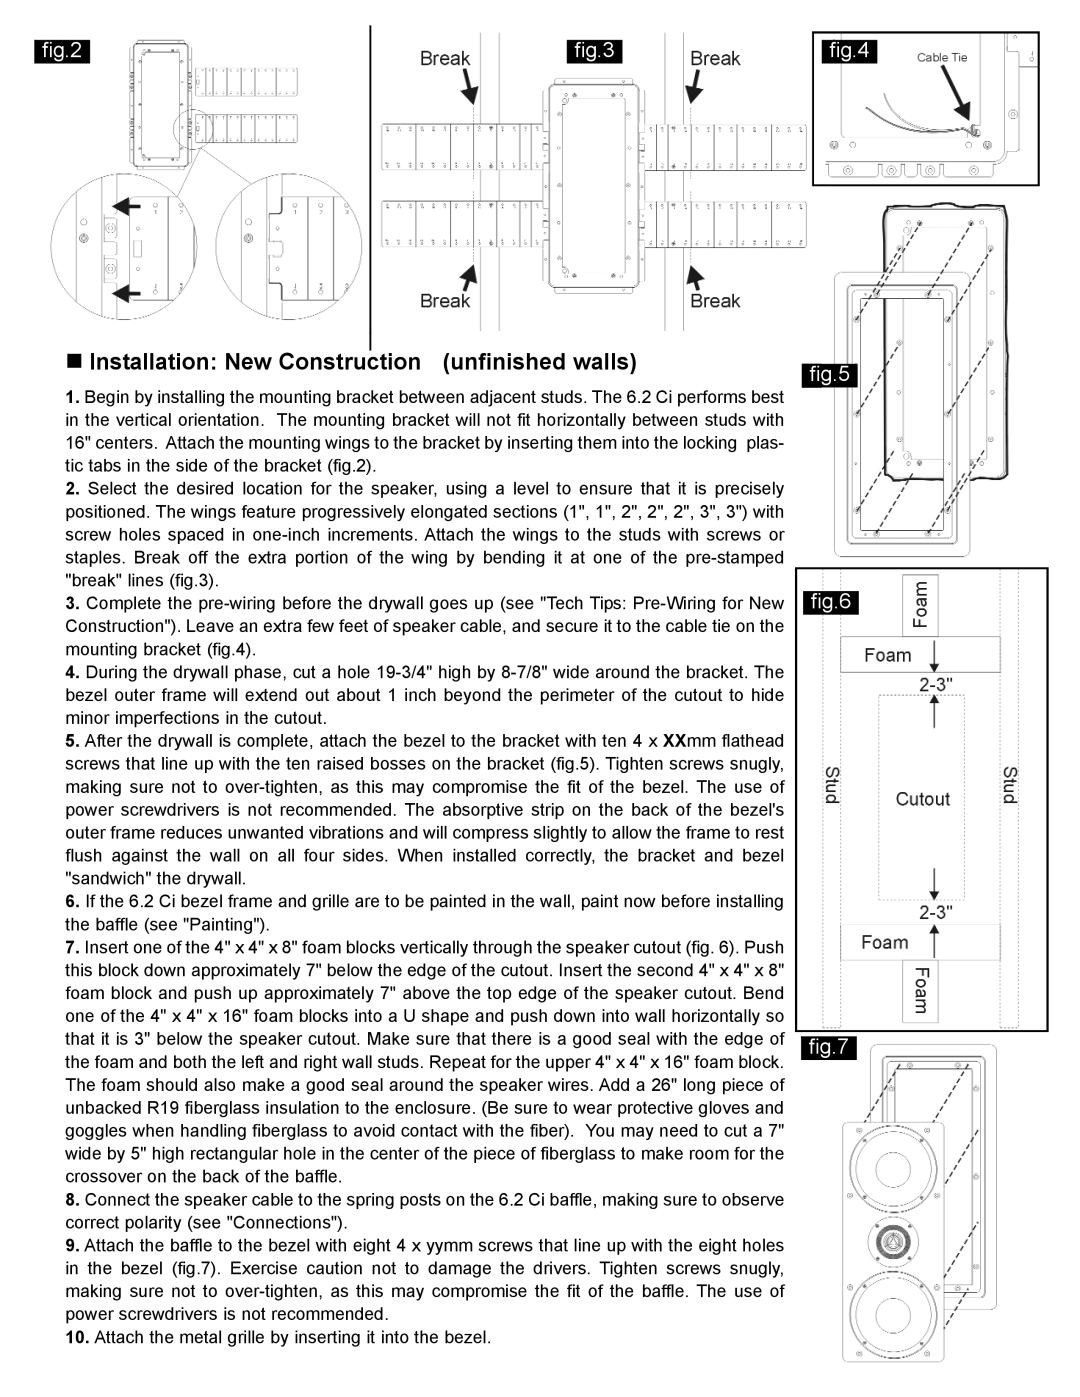 NHT 6.2 Ci owner manual „Installation New Construction unfinished walls 